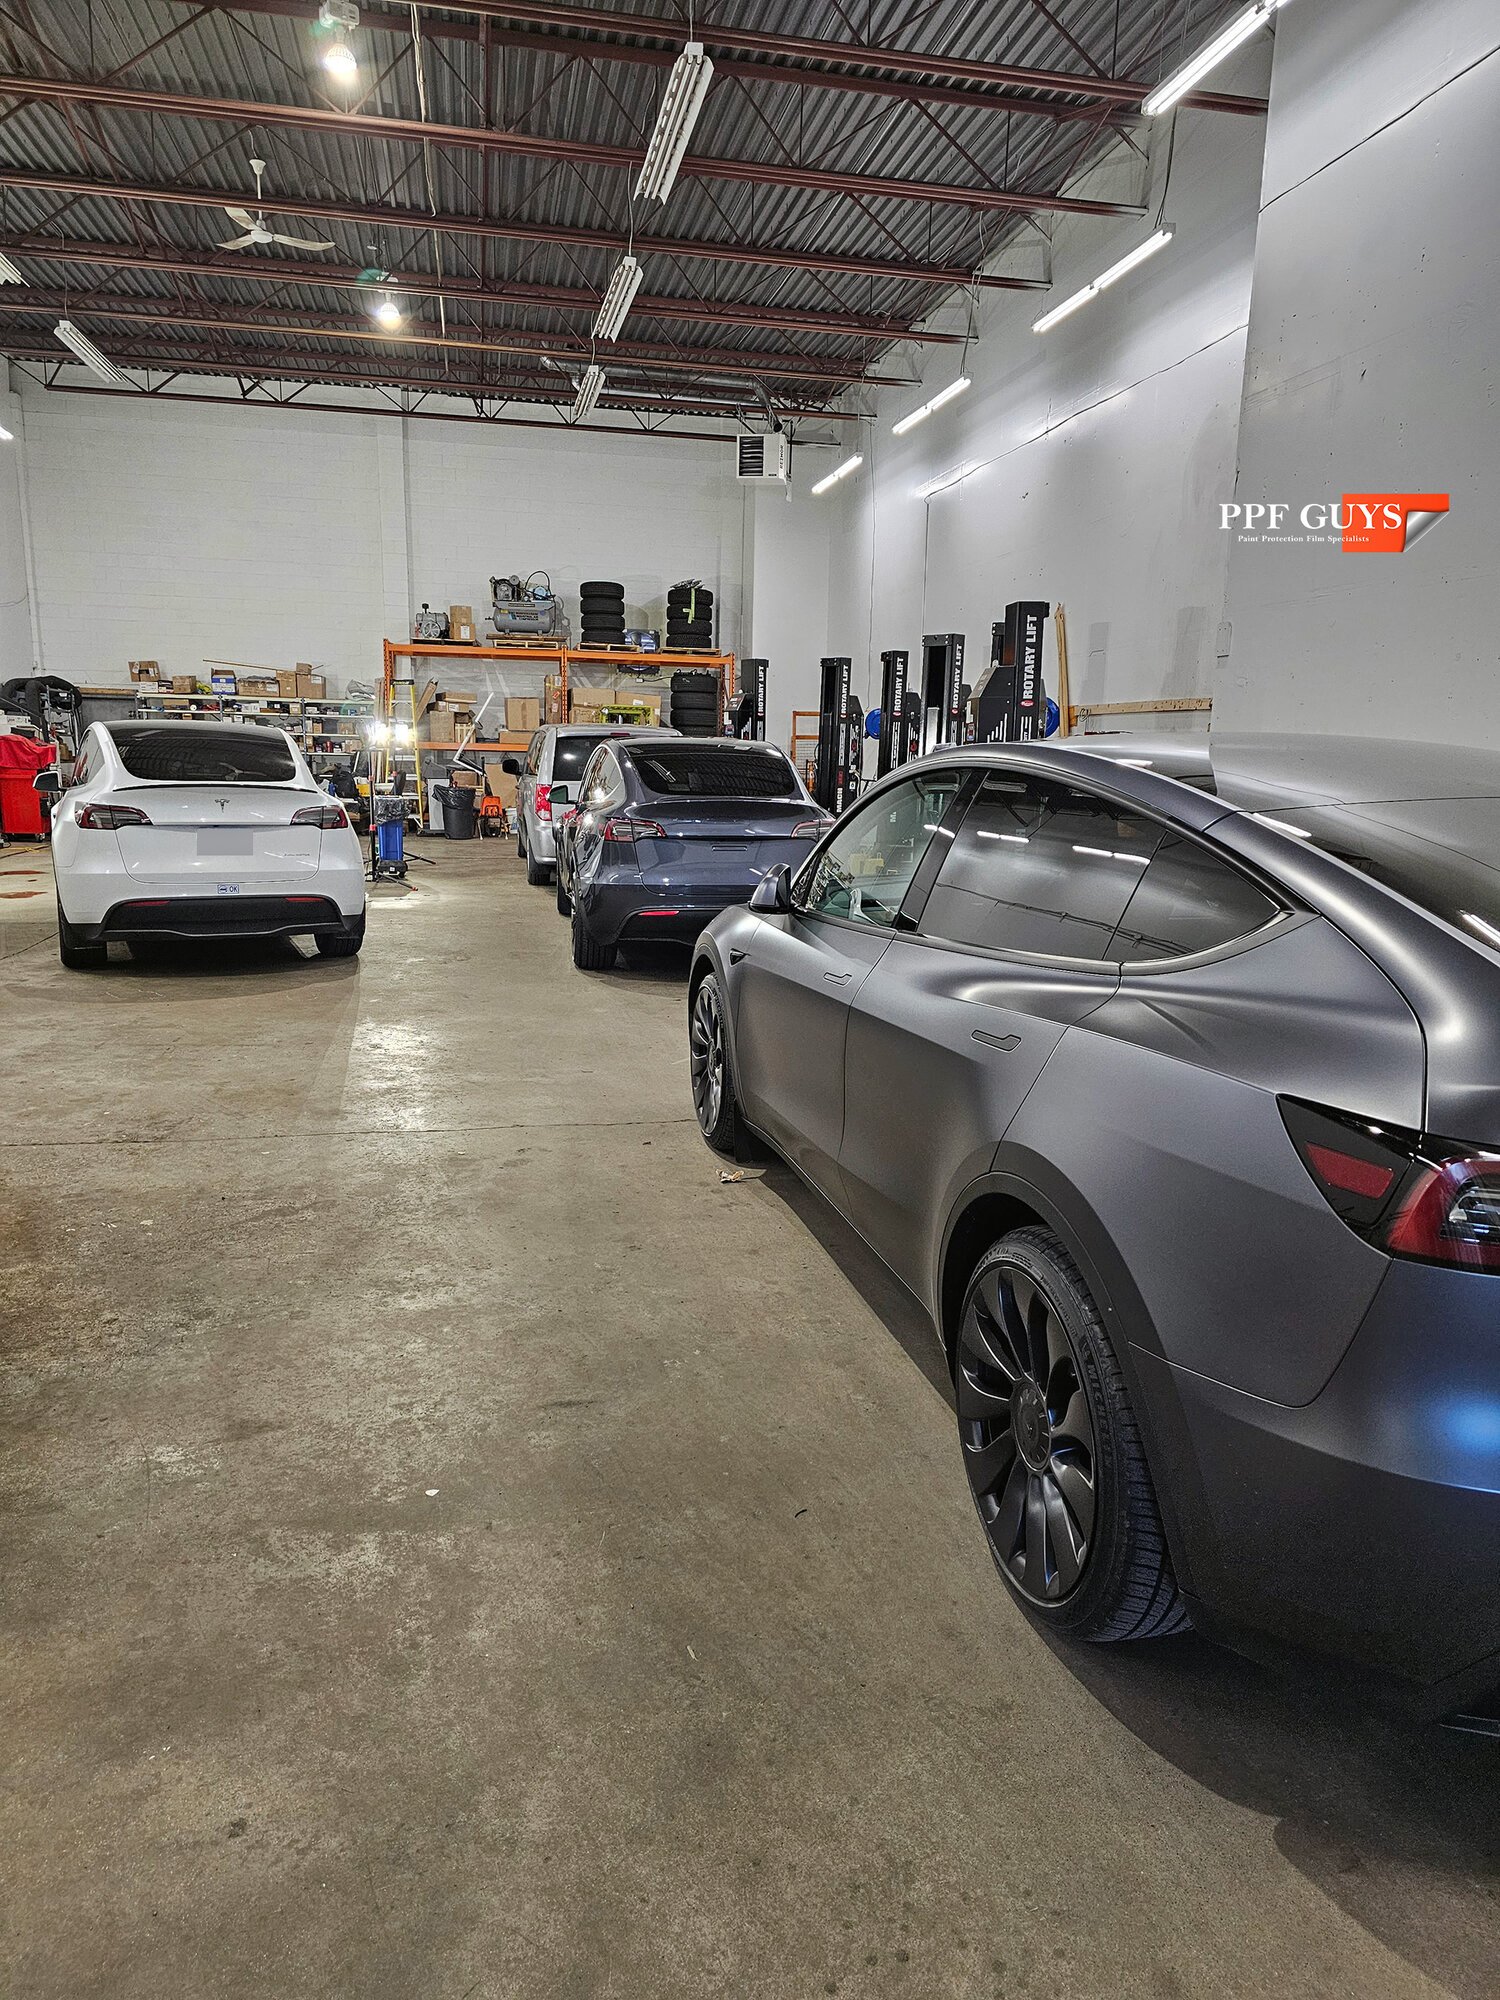 PPF Guys Model Y Silver Full Body Ultimate Fusion, blacked out emblems (16).jpg